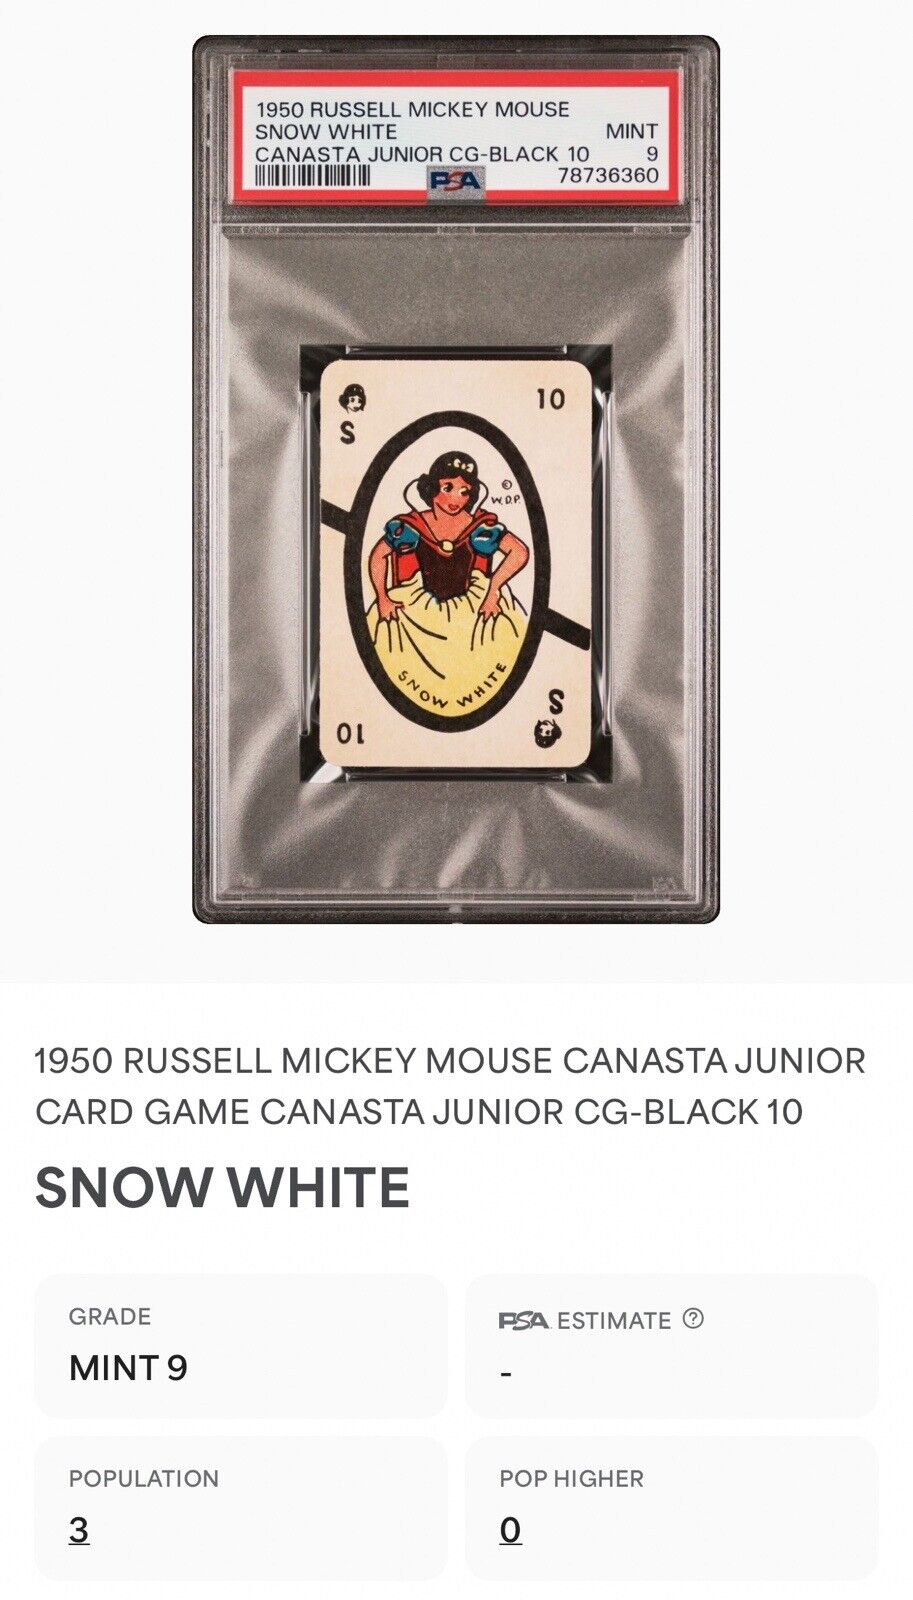 RARE VINTAGE 1950s RUSSELL MICKEY MOUSE SNOW WHITE CANASTA CARD PSA 9 MINT